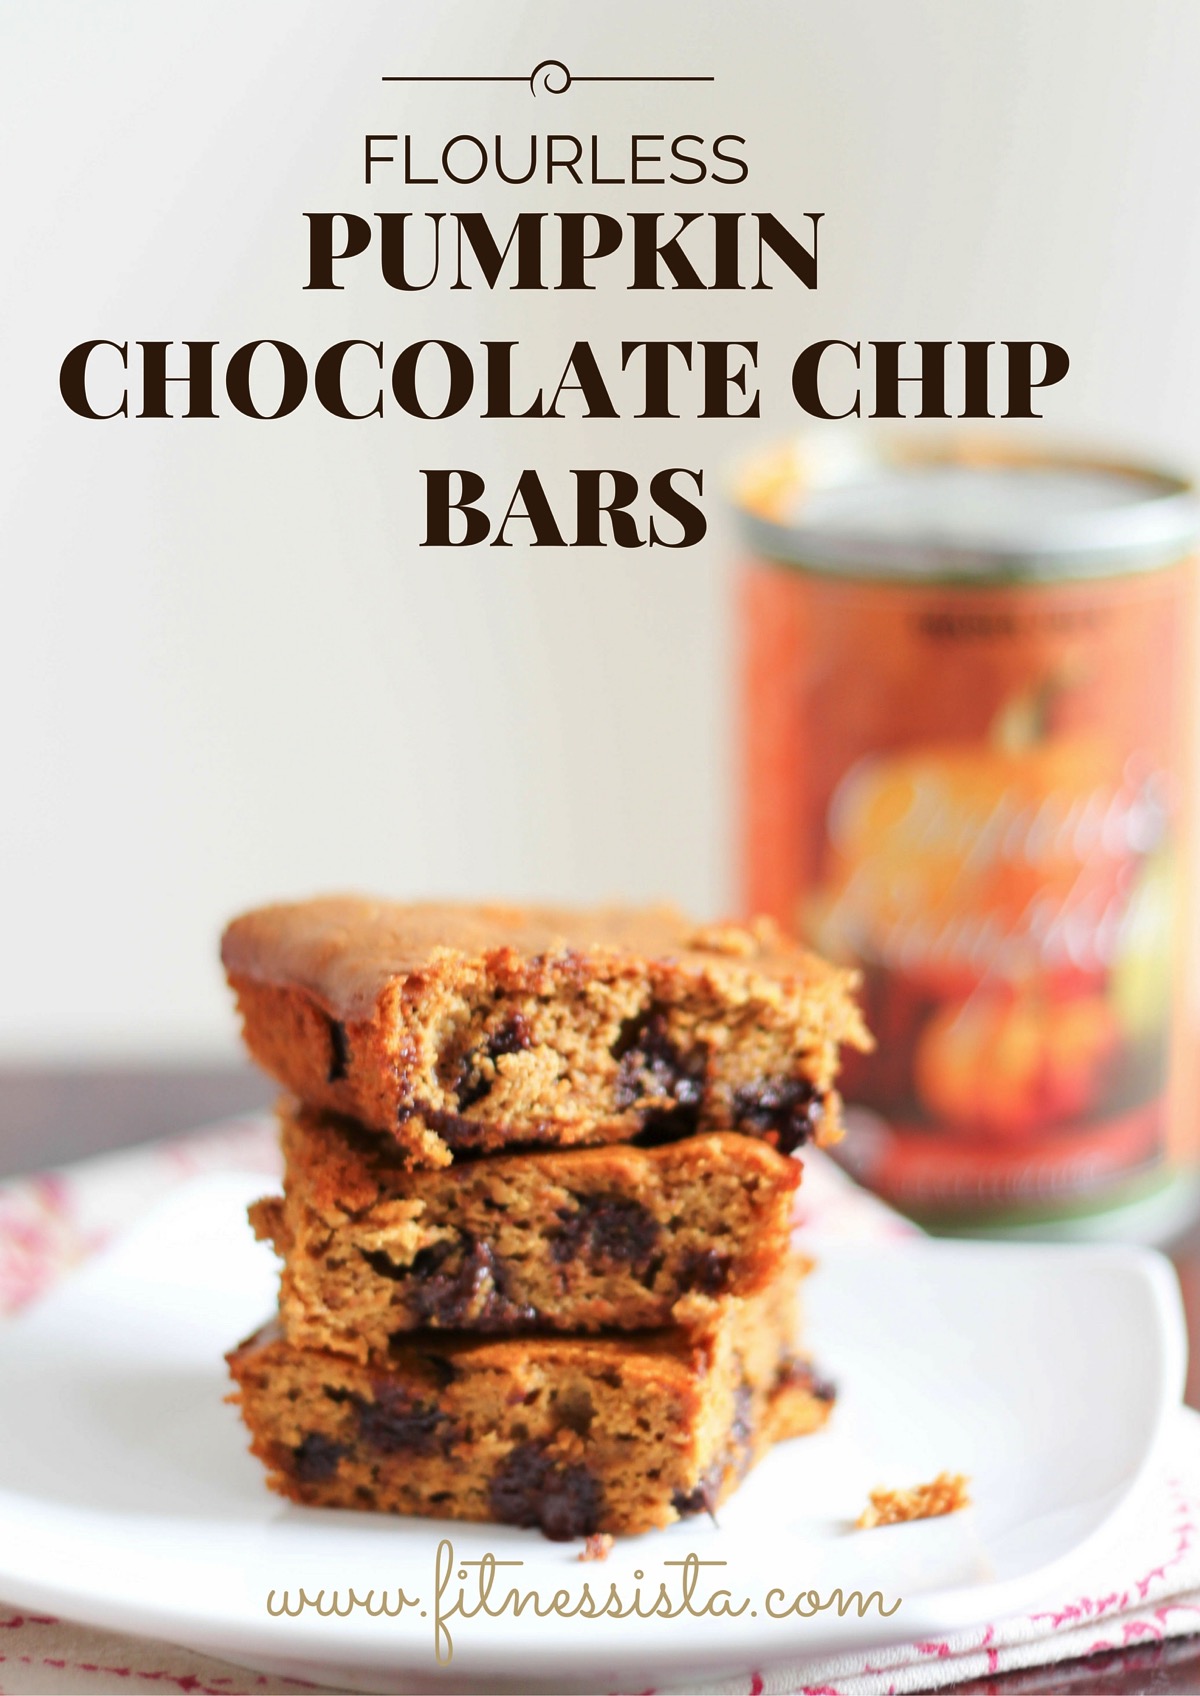 Flourless pumpkin chocolate chip bars are a fall treat packed with nutrients